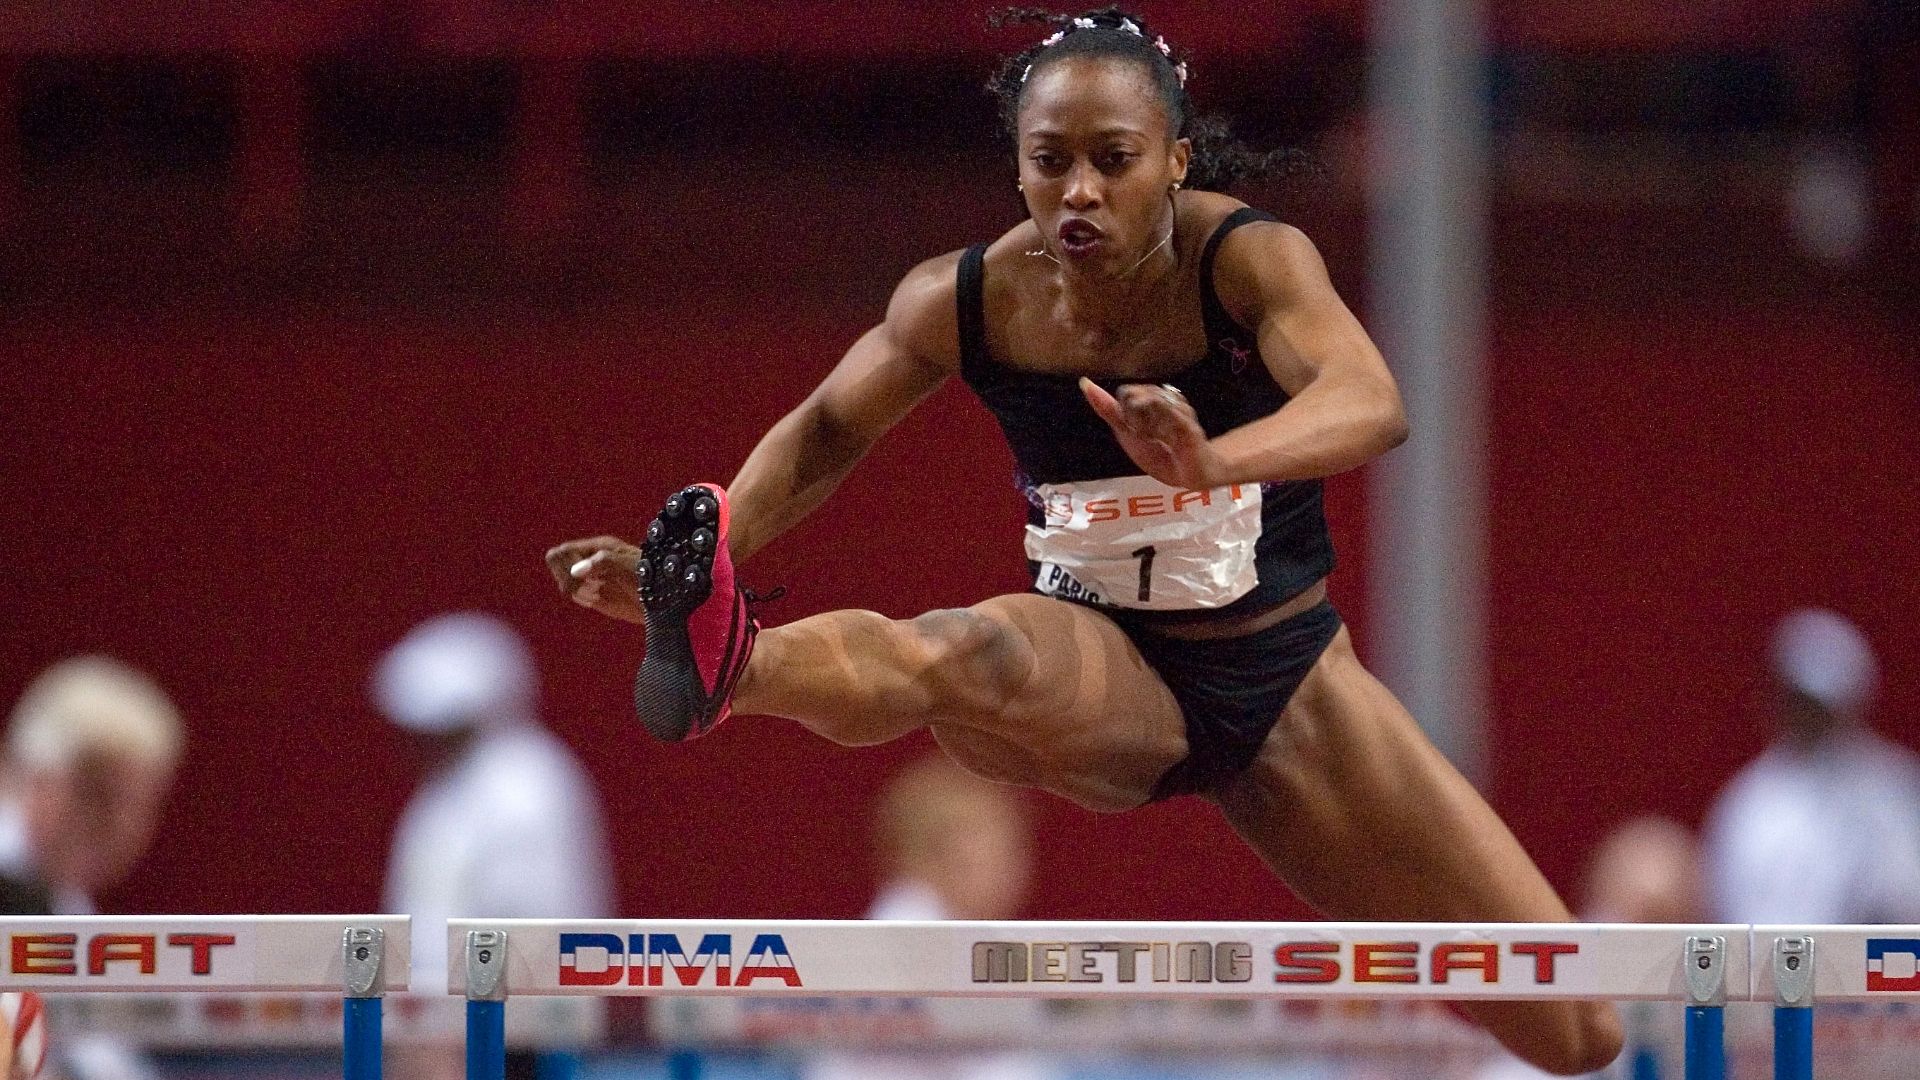 Gail Devers may have been the best hurdler of her time while also battling ...